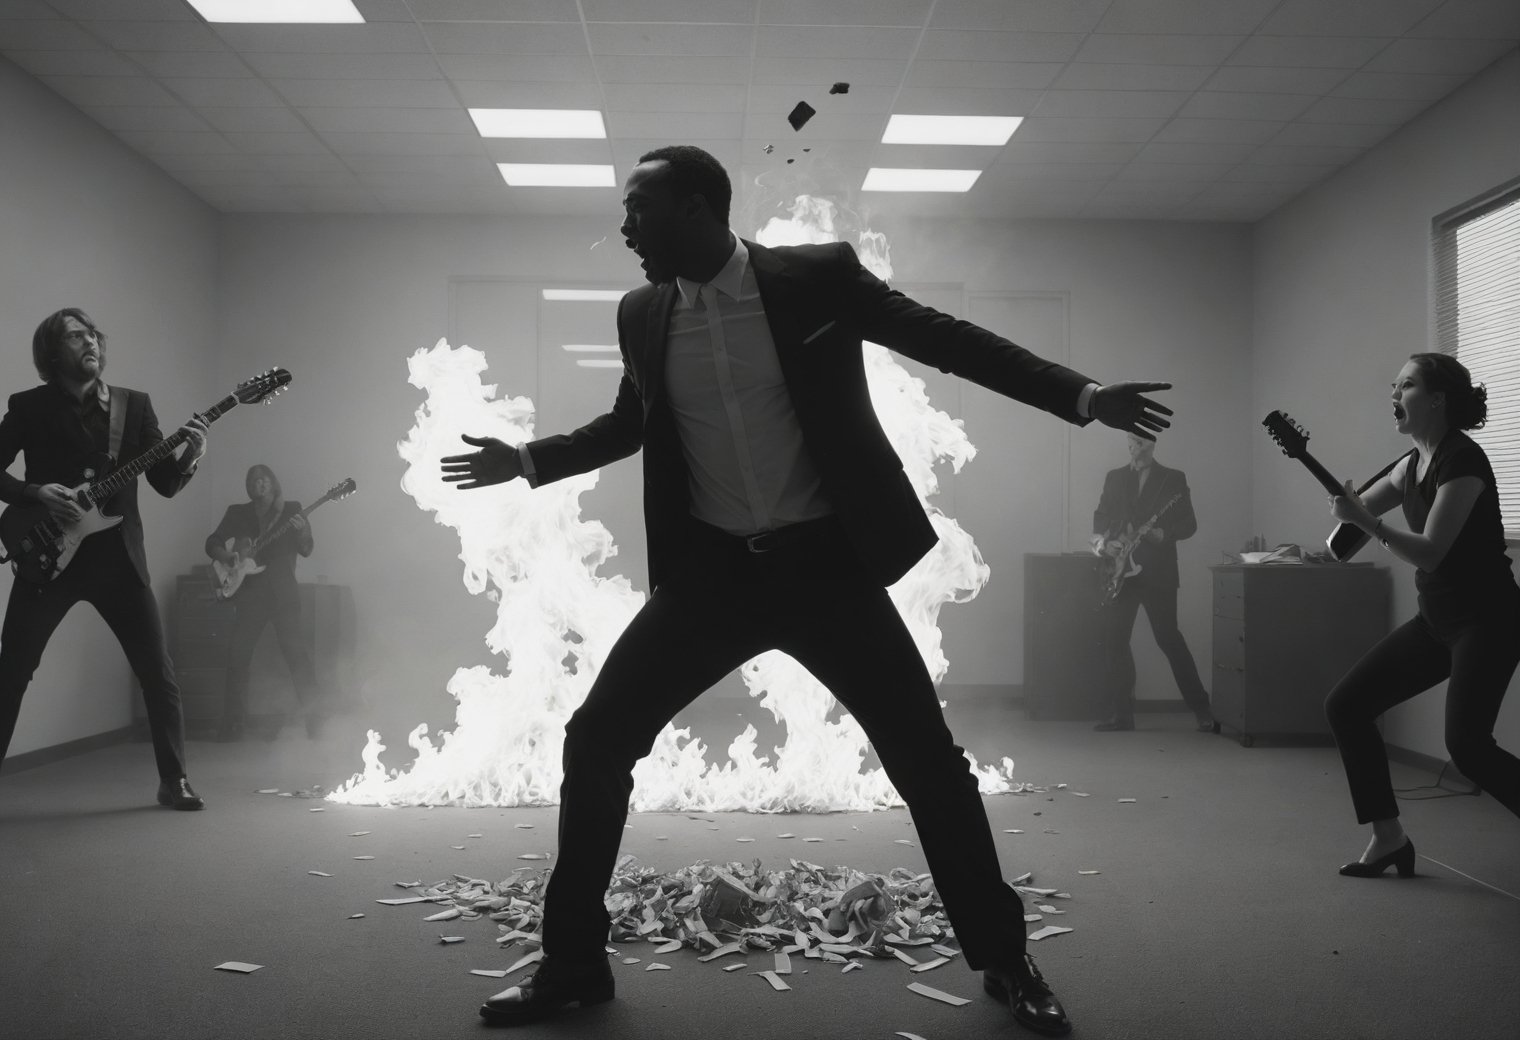 single shot of A mosh pit in an office space, metal band playing, smoke and flames, papers flying, , directed by Lee Daniels High-contrast, digital, black and white, sharp focus, deep blacks, brilliant whites, modern, digital B&W